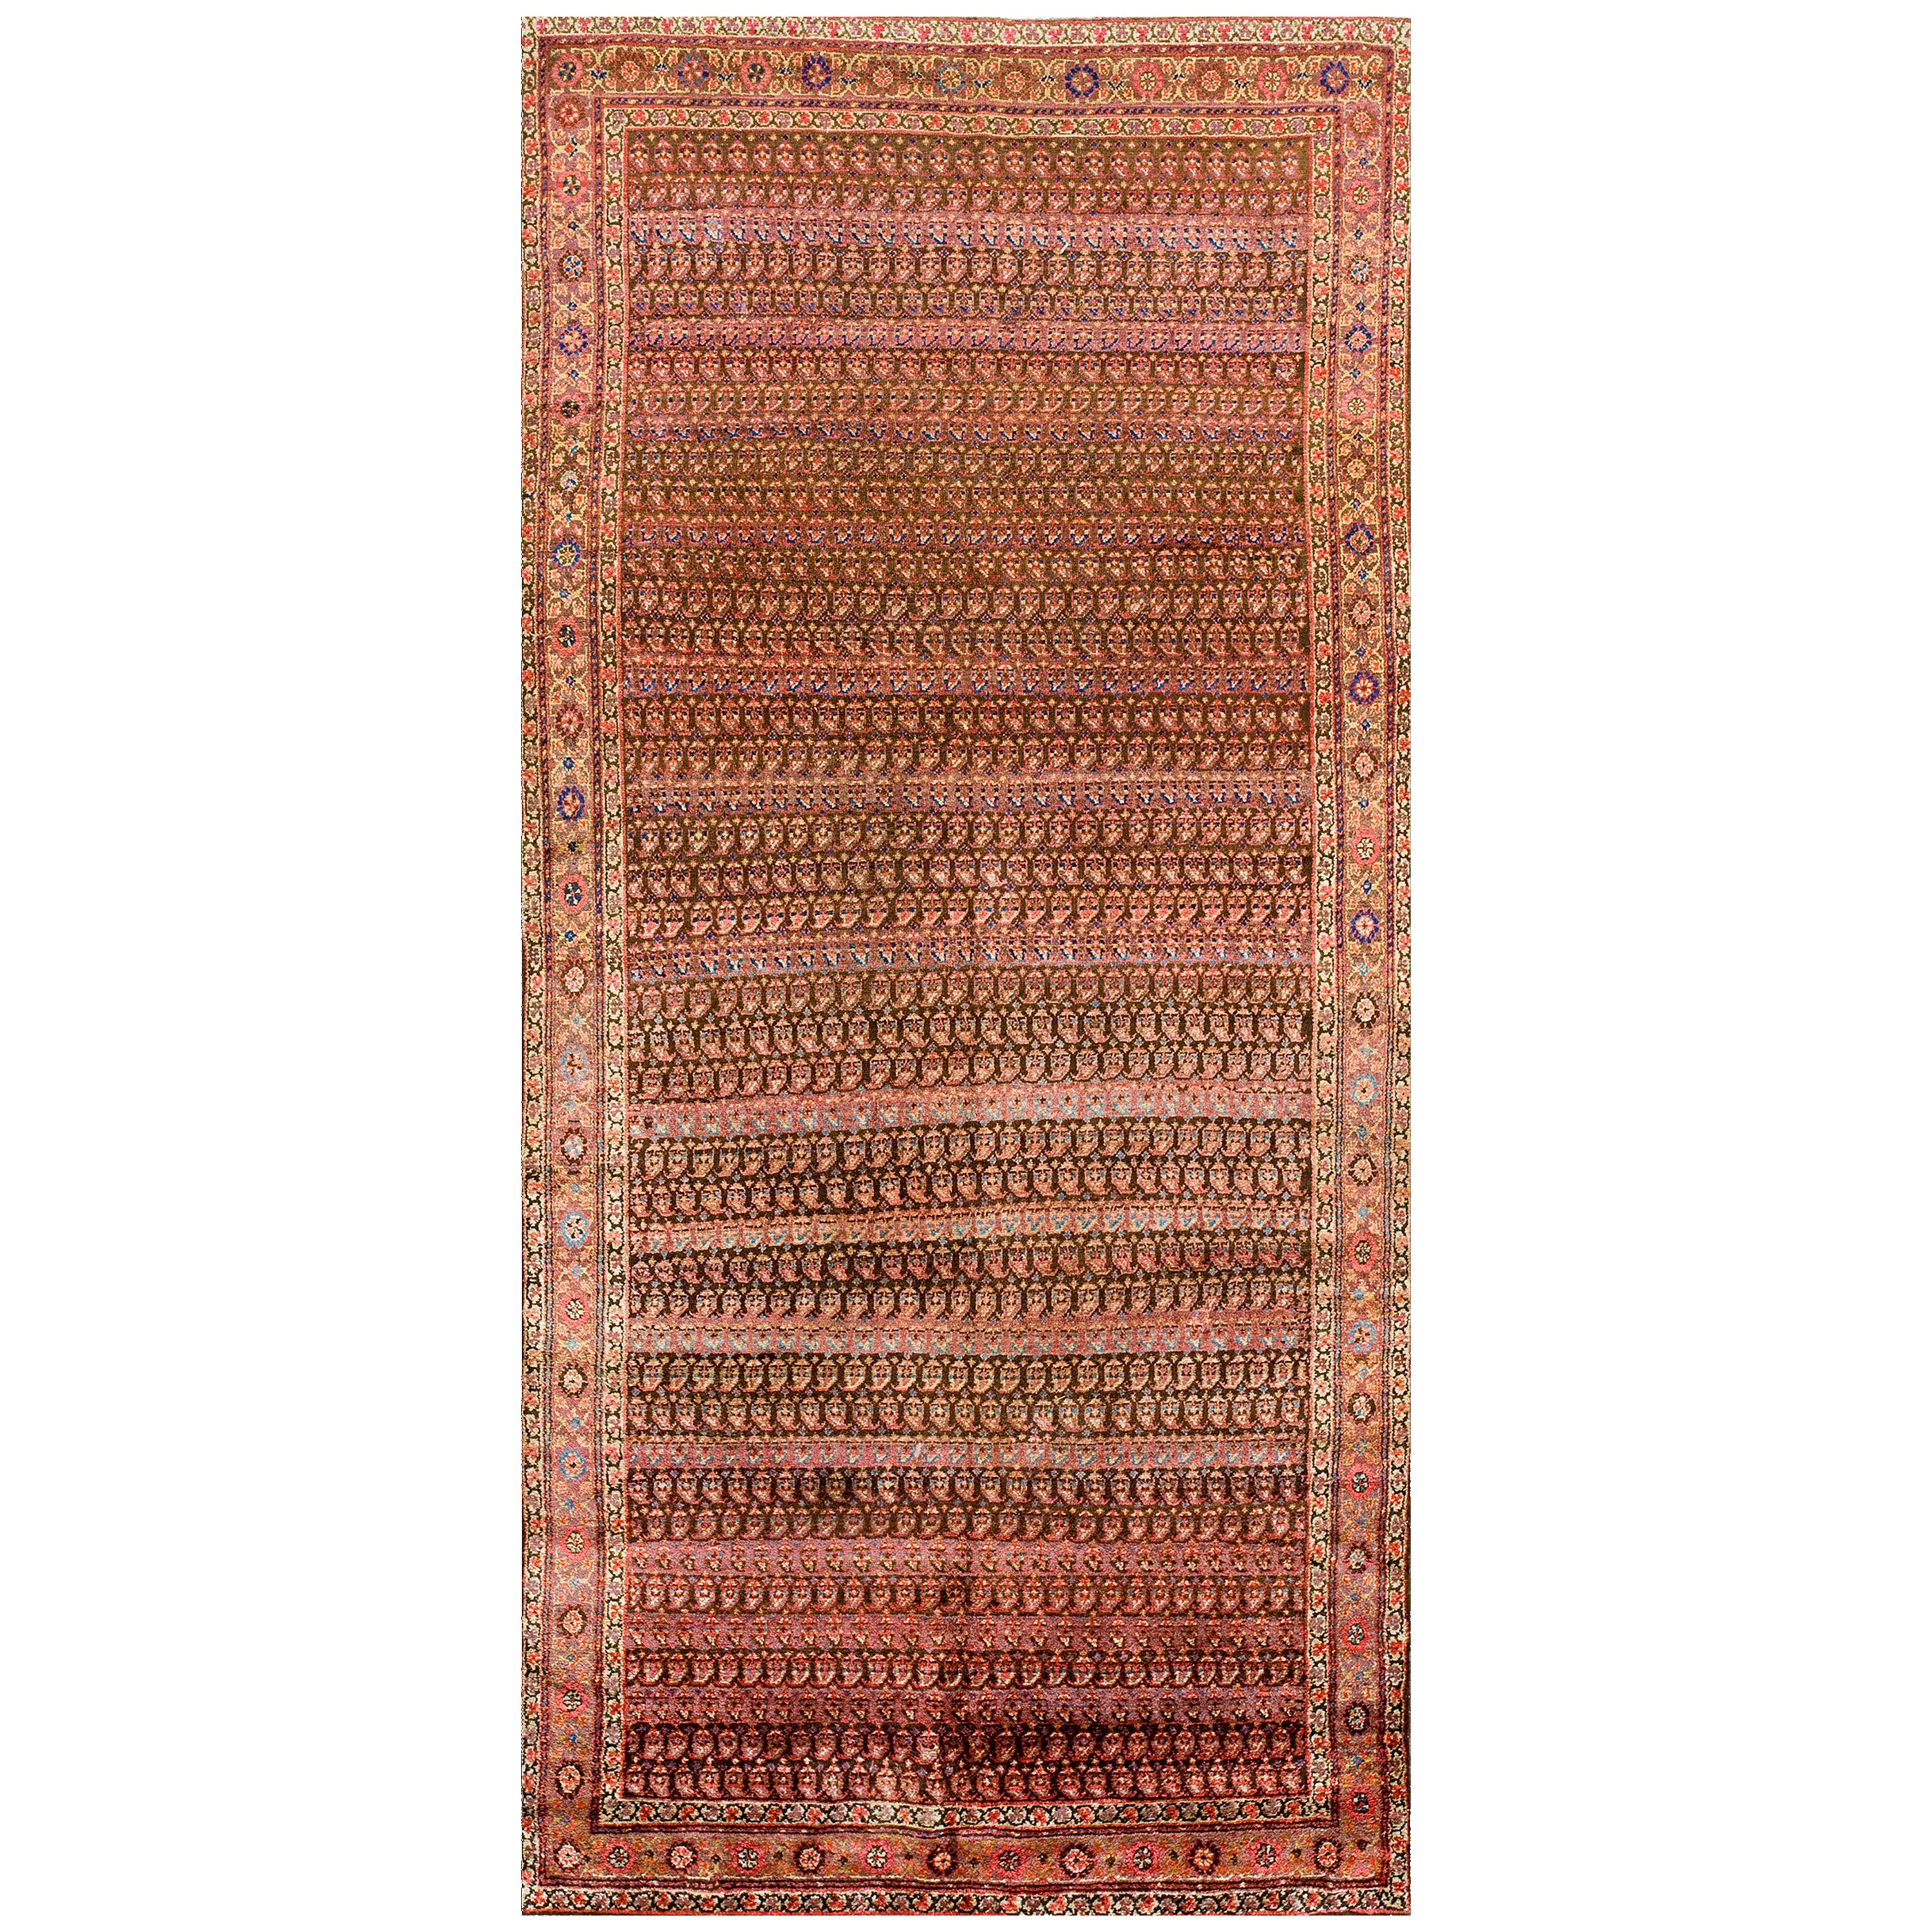 Late 19th Century Persian Malayer Carpet ( 4'2" x 8'10" - 127 x 270 ) For Sale